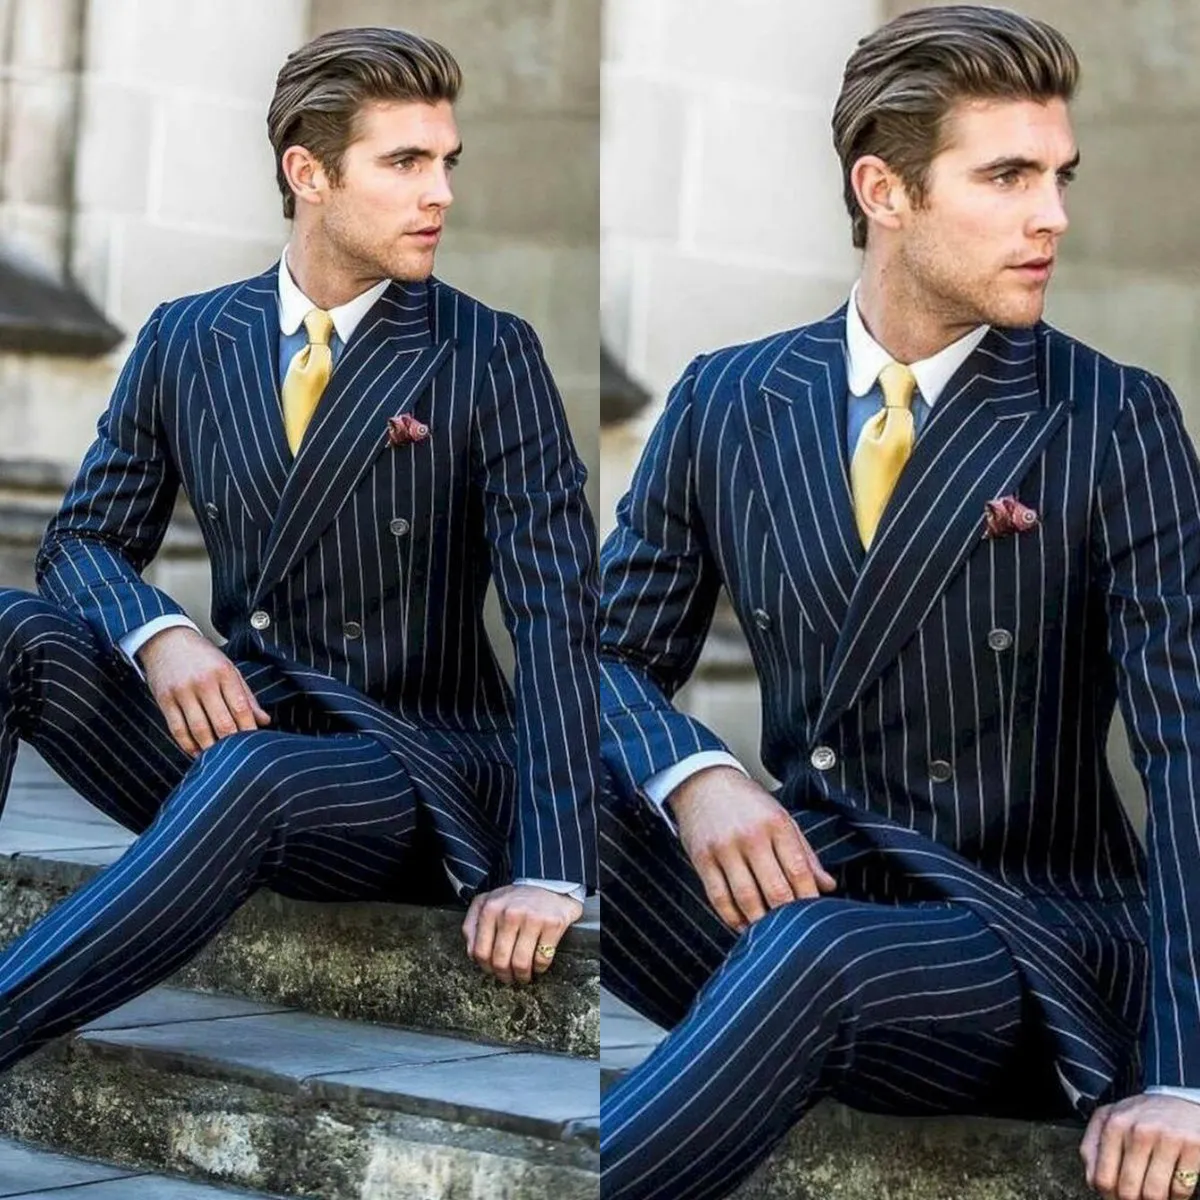 Premium Slim Fit Pinstripe Striped Suit Men For Formal Occasions Jacket And  Pants Included From Huifangzou, $86.2